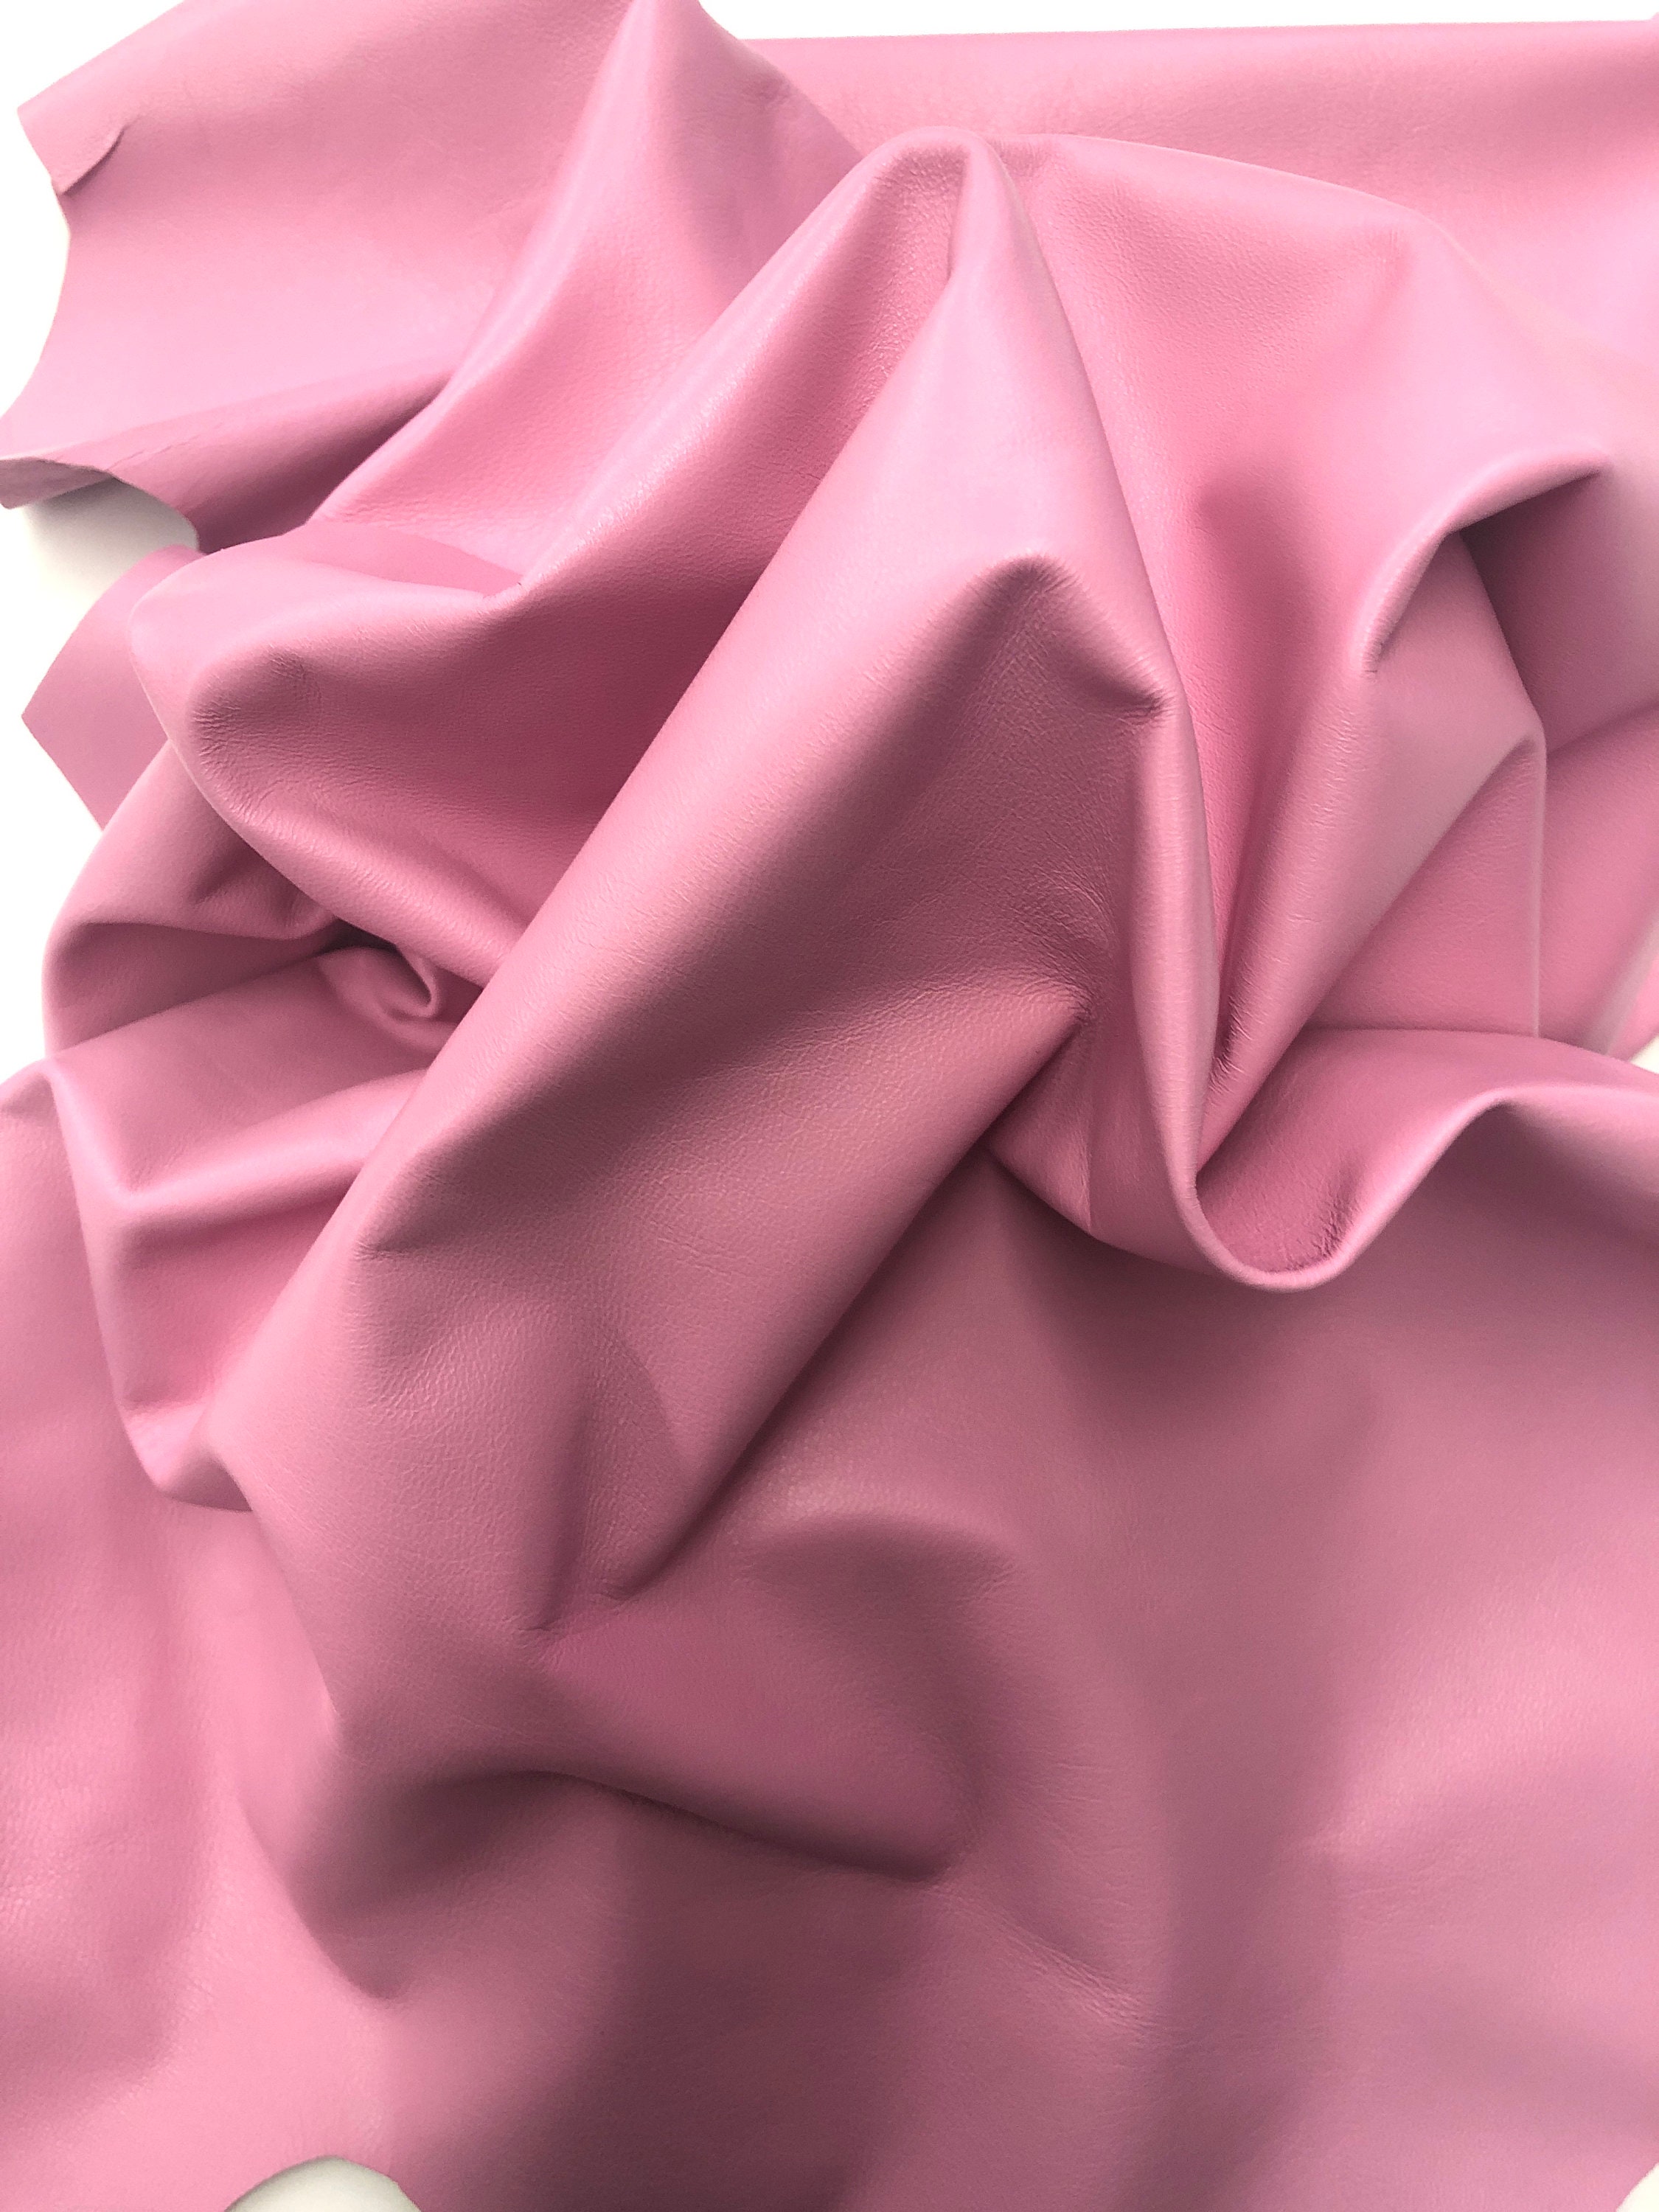 PINK GENUINE LEATHER Leather Sheet Choose Size or Full - Etsy